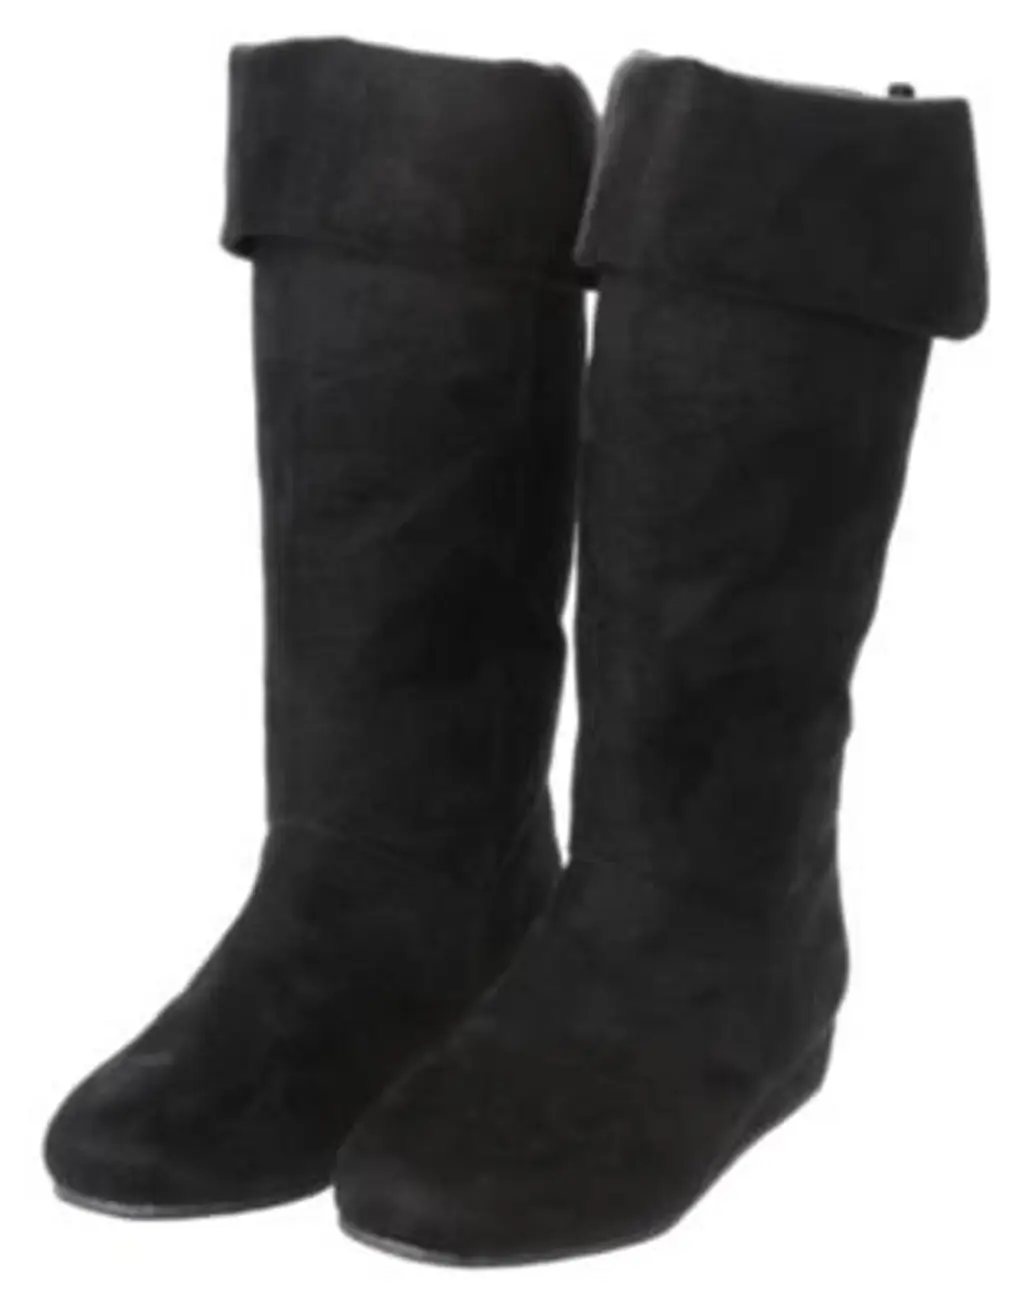 Crazy 8 over-the-Knee Boot